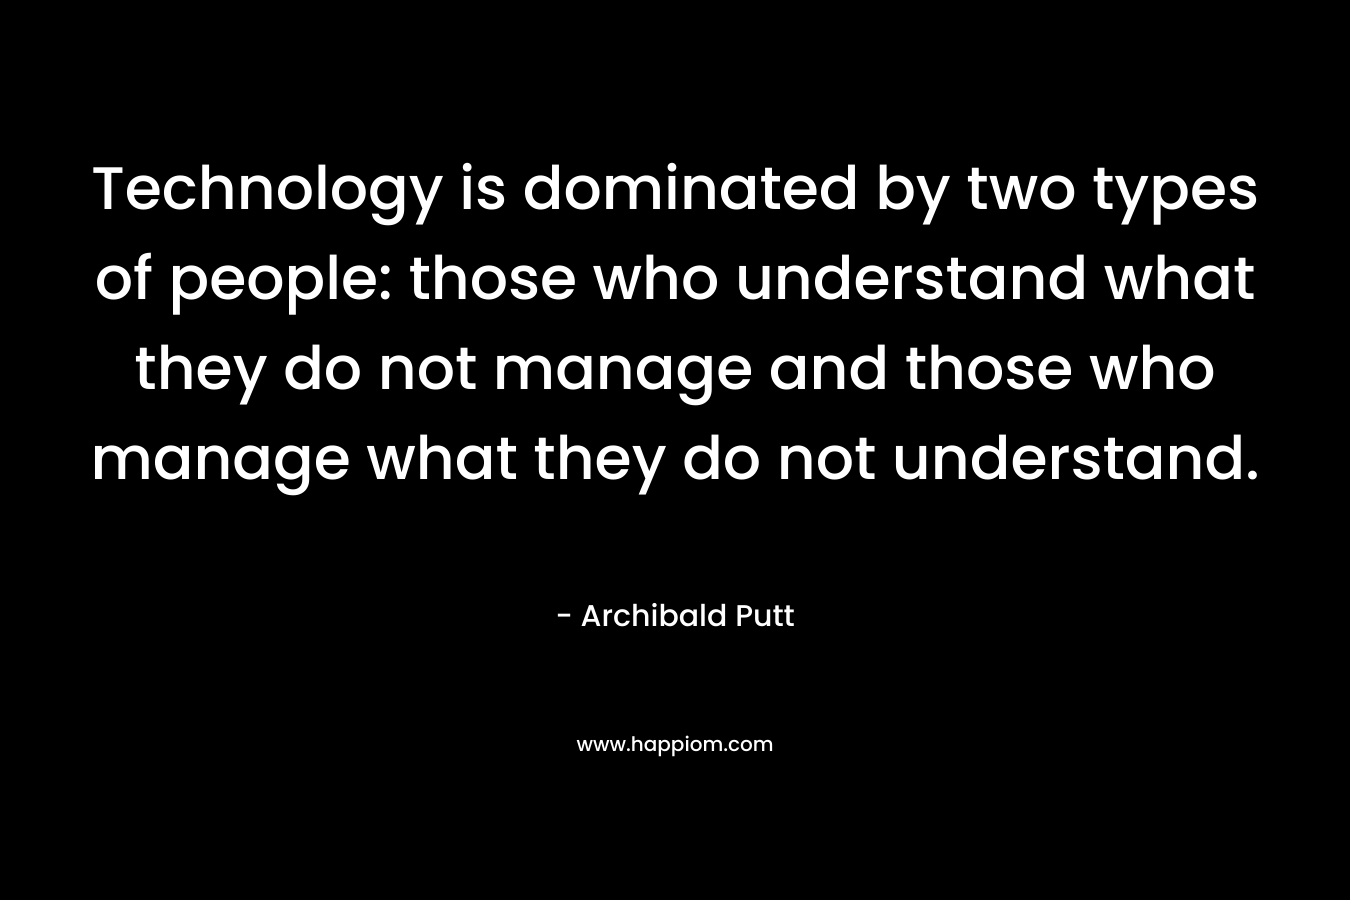 Technology is dominated by two types of people: those who understand what they do not manage and those who manage what they do not understand. – Archibald Putt